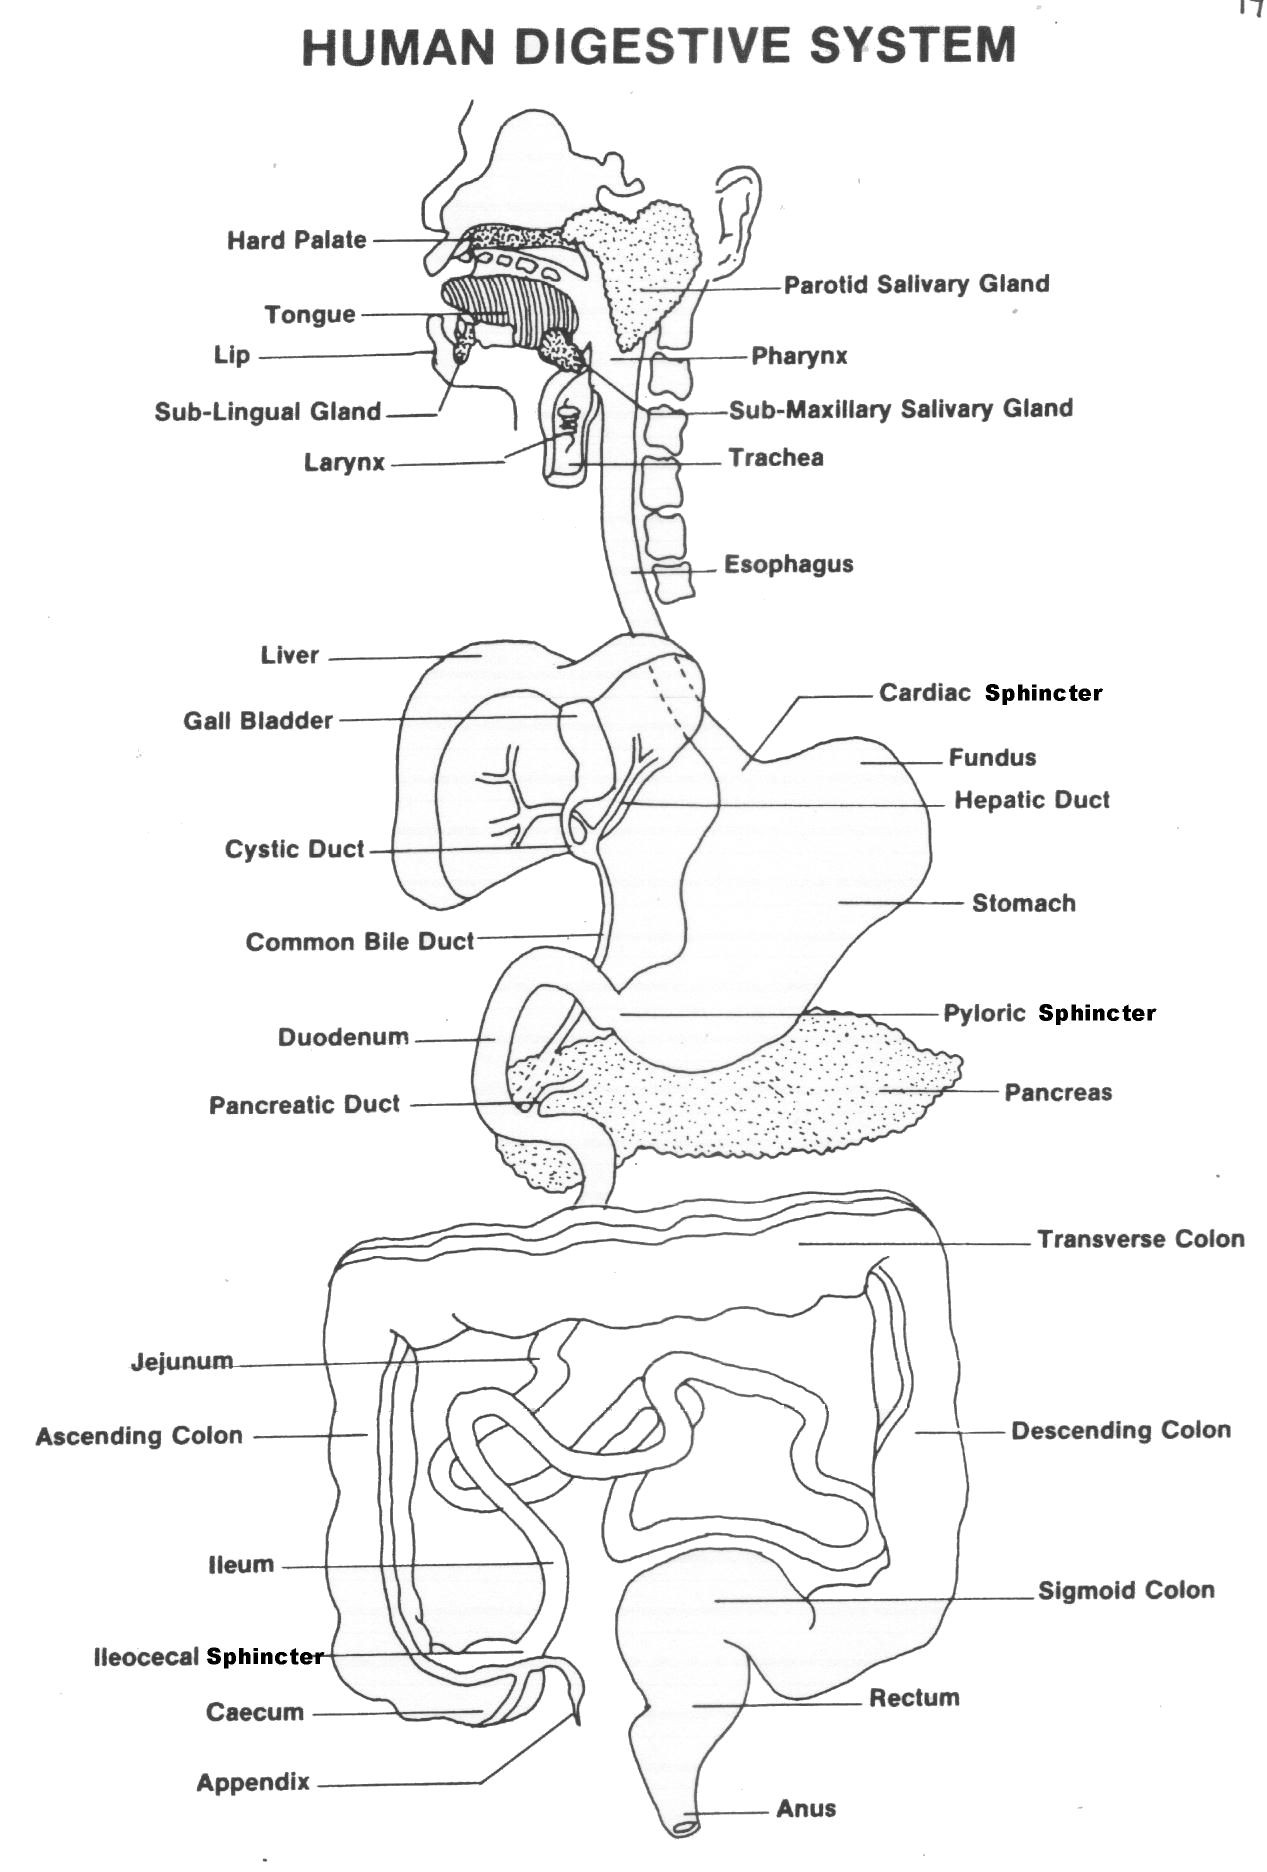 Digestive System Worksheet Answers 29 the Digestive System Worksheet Answers Worksheet